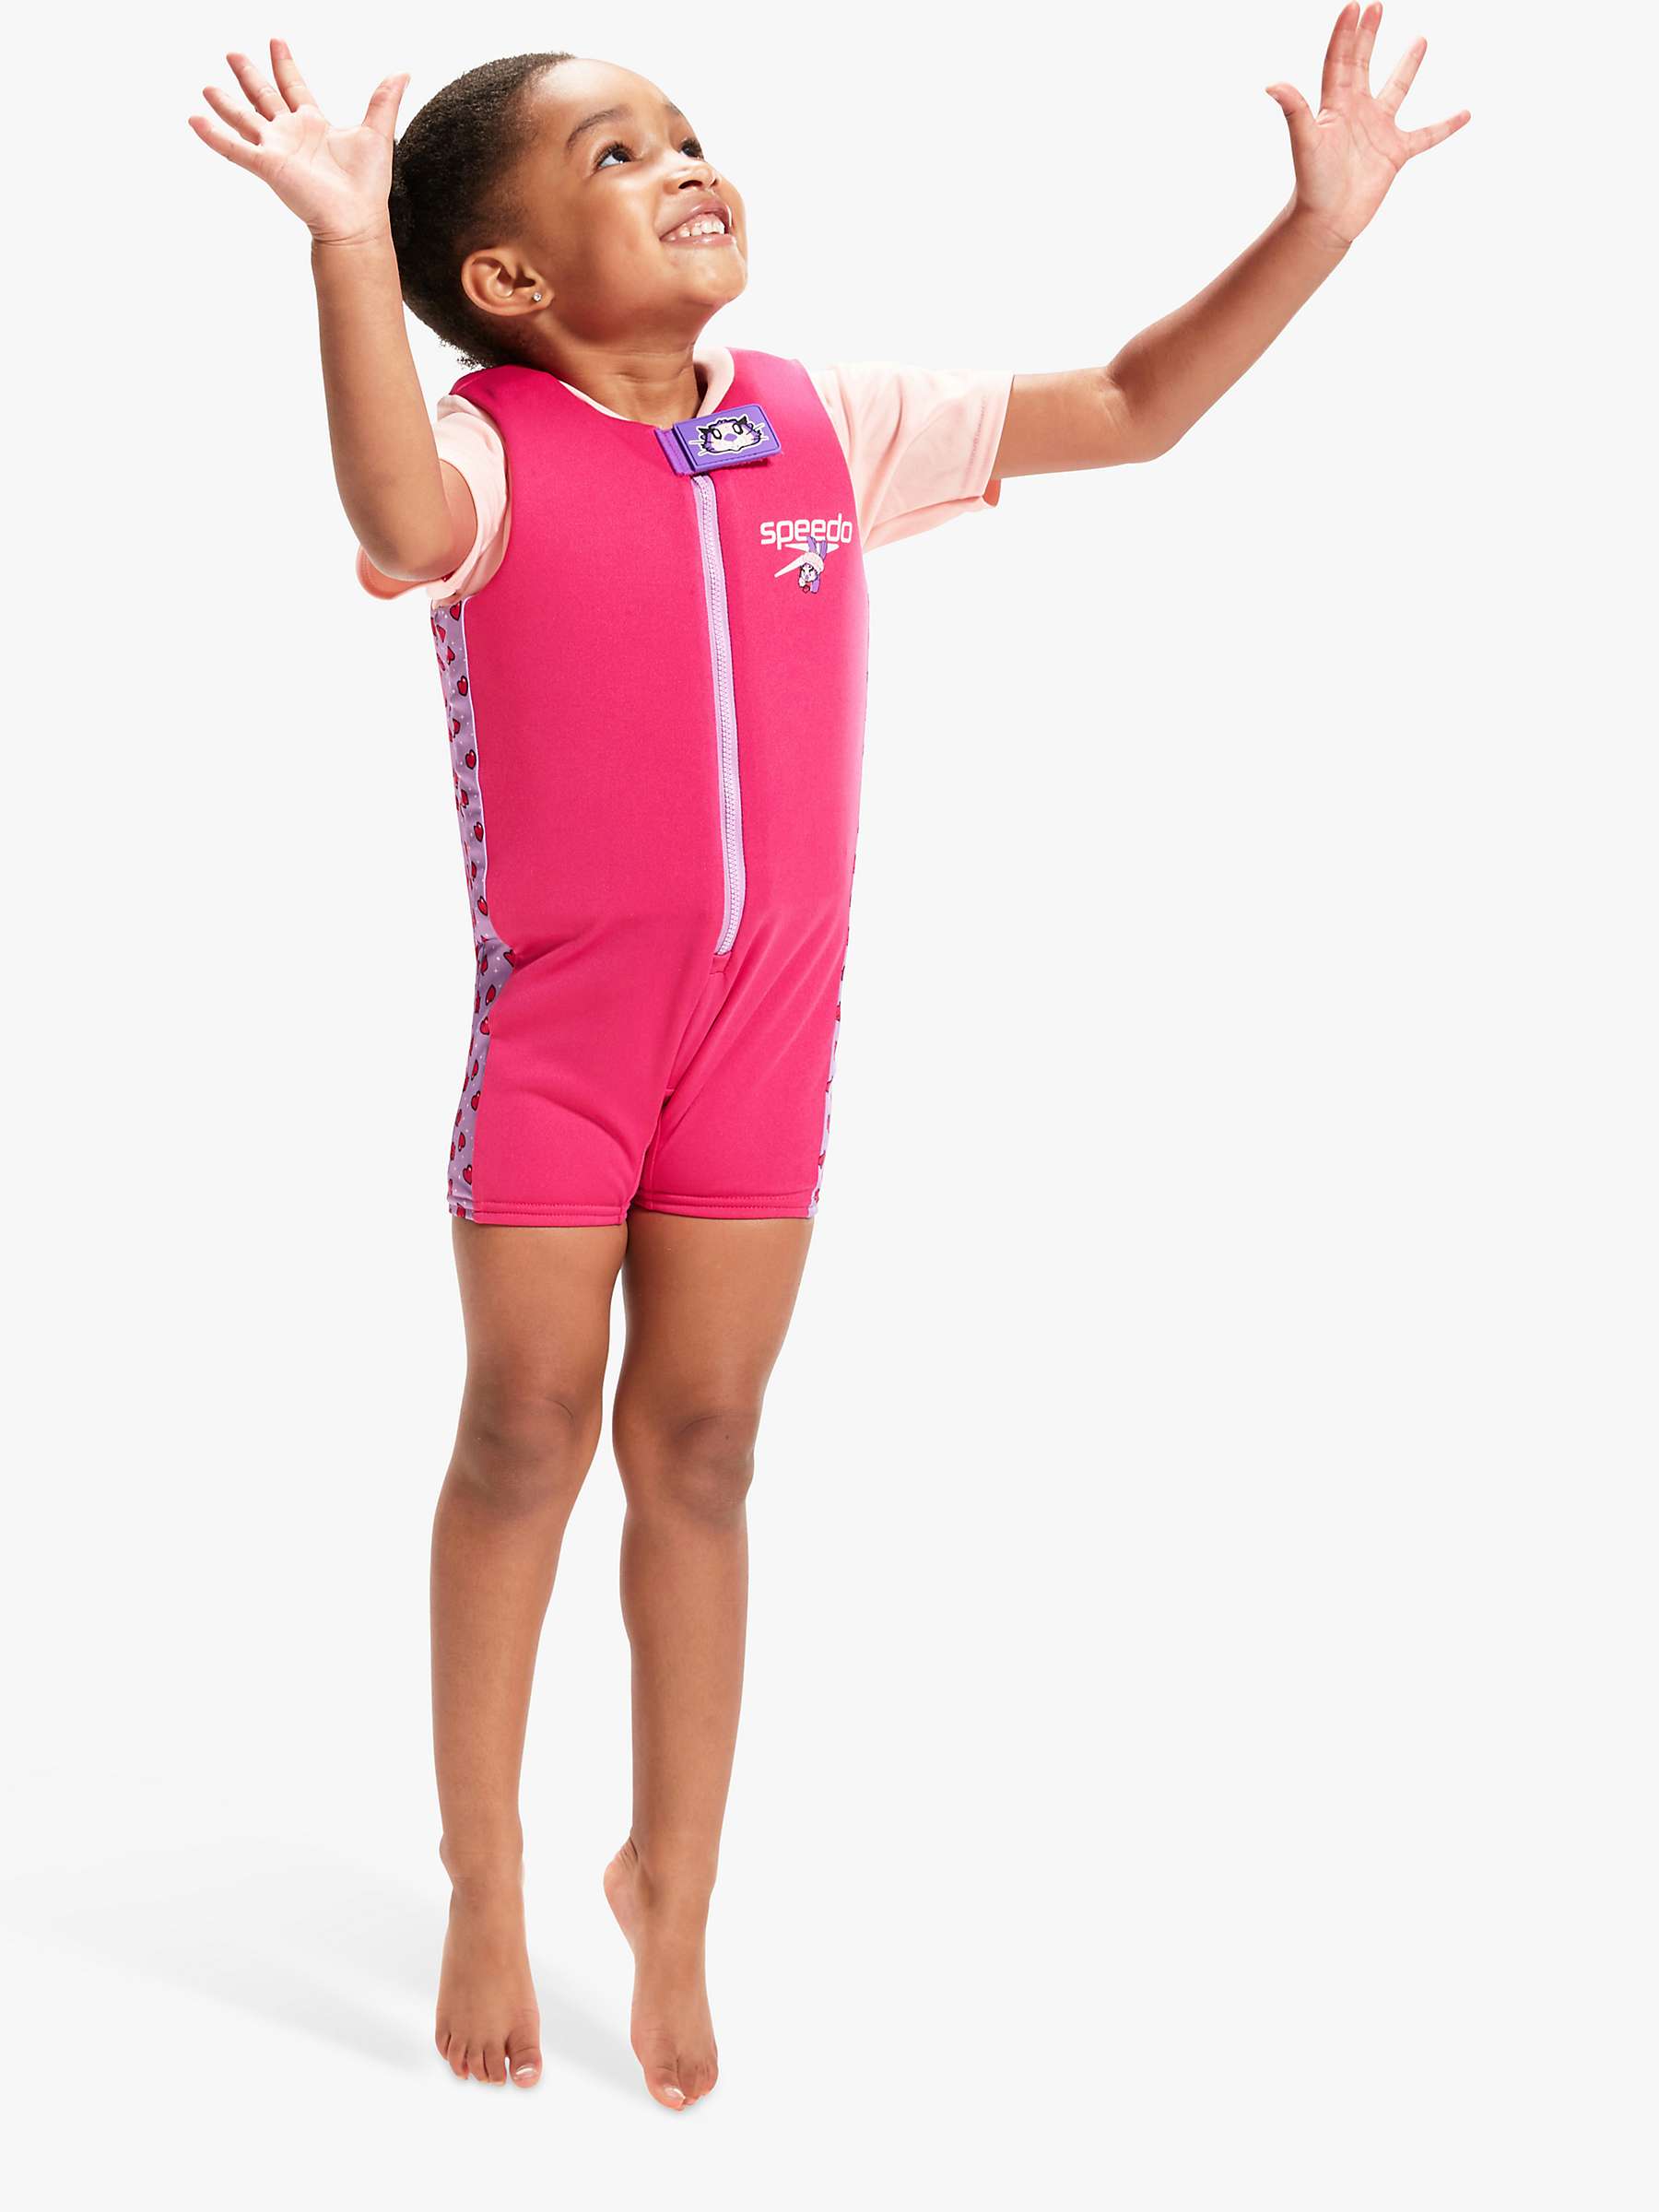 Buy Speedo Baby Seal Floatsuit, Miami Lilac/Cherry Online at johnlewis.com